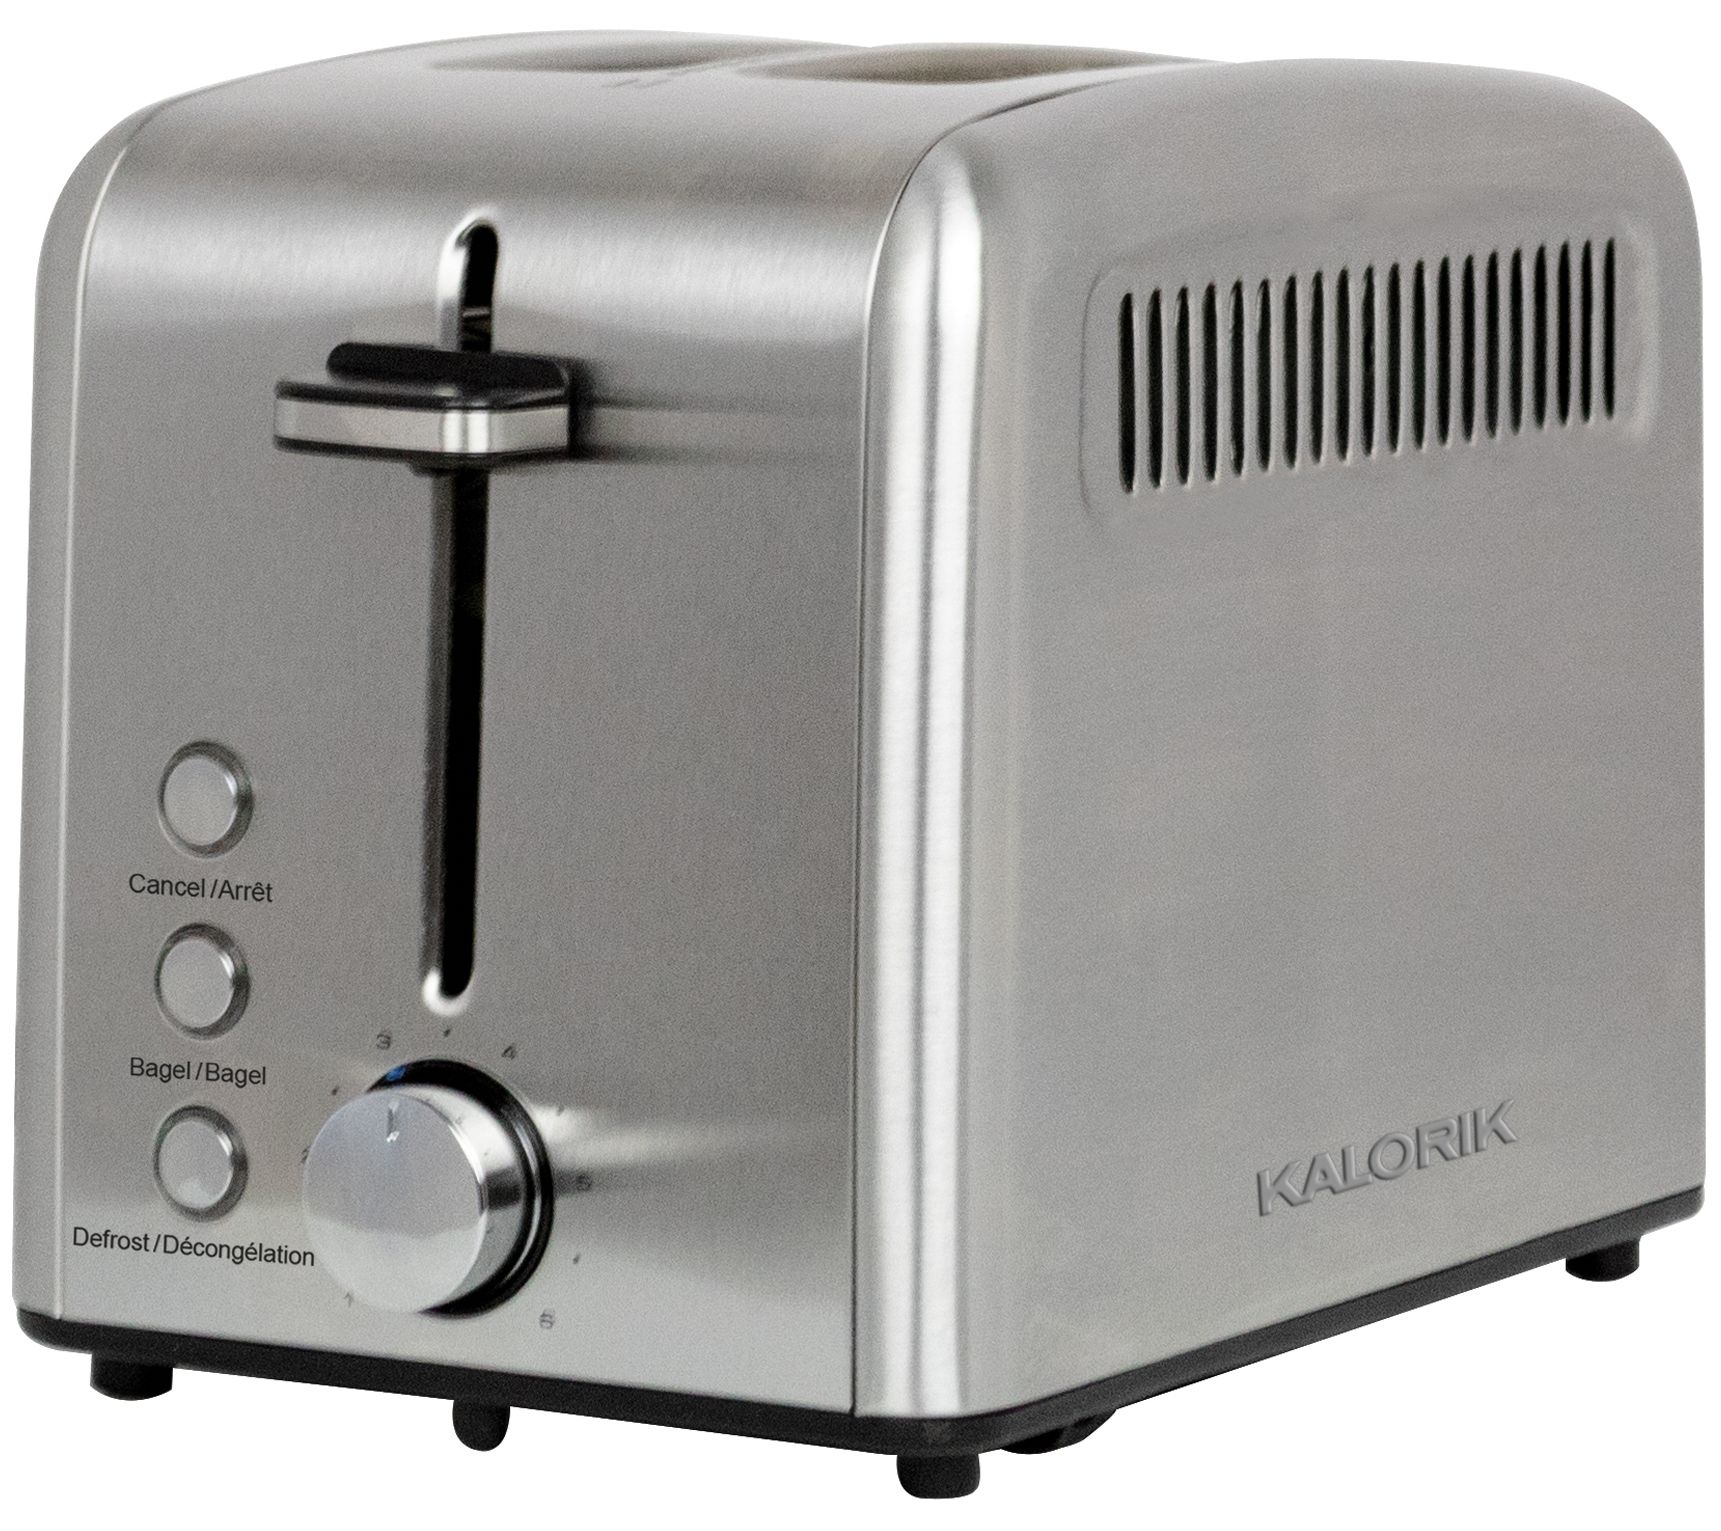 2 Slice Toaster Stainless Steel Cool Touch Kitchen Compact Toaster 